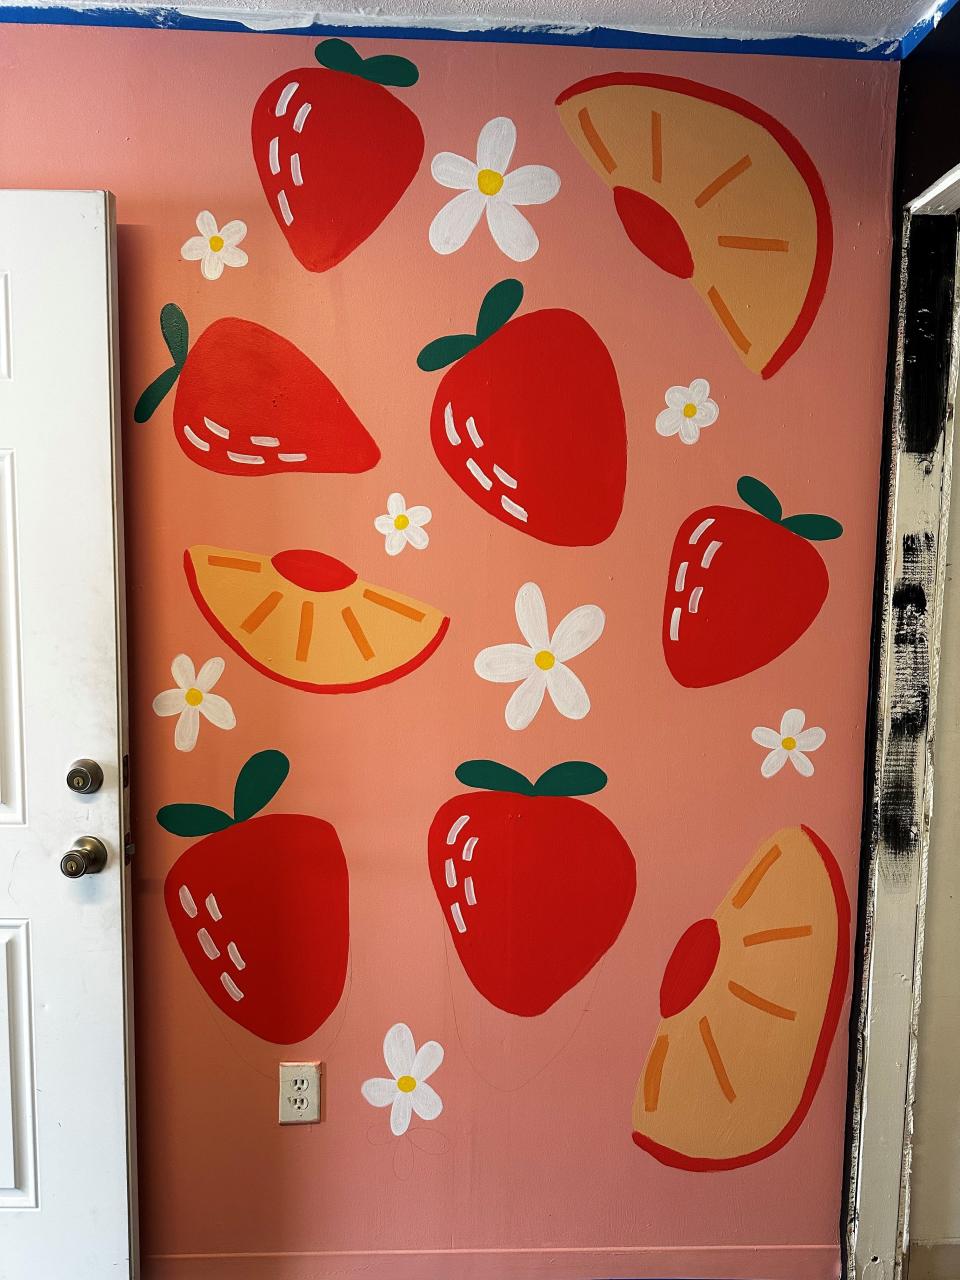 Sam Kearney, owner of Roll Up Herbal Bar, painted a mural of fruits inside the mocktail bar's new brick-and-mortar in Waynesville.